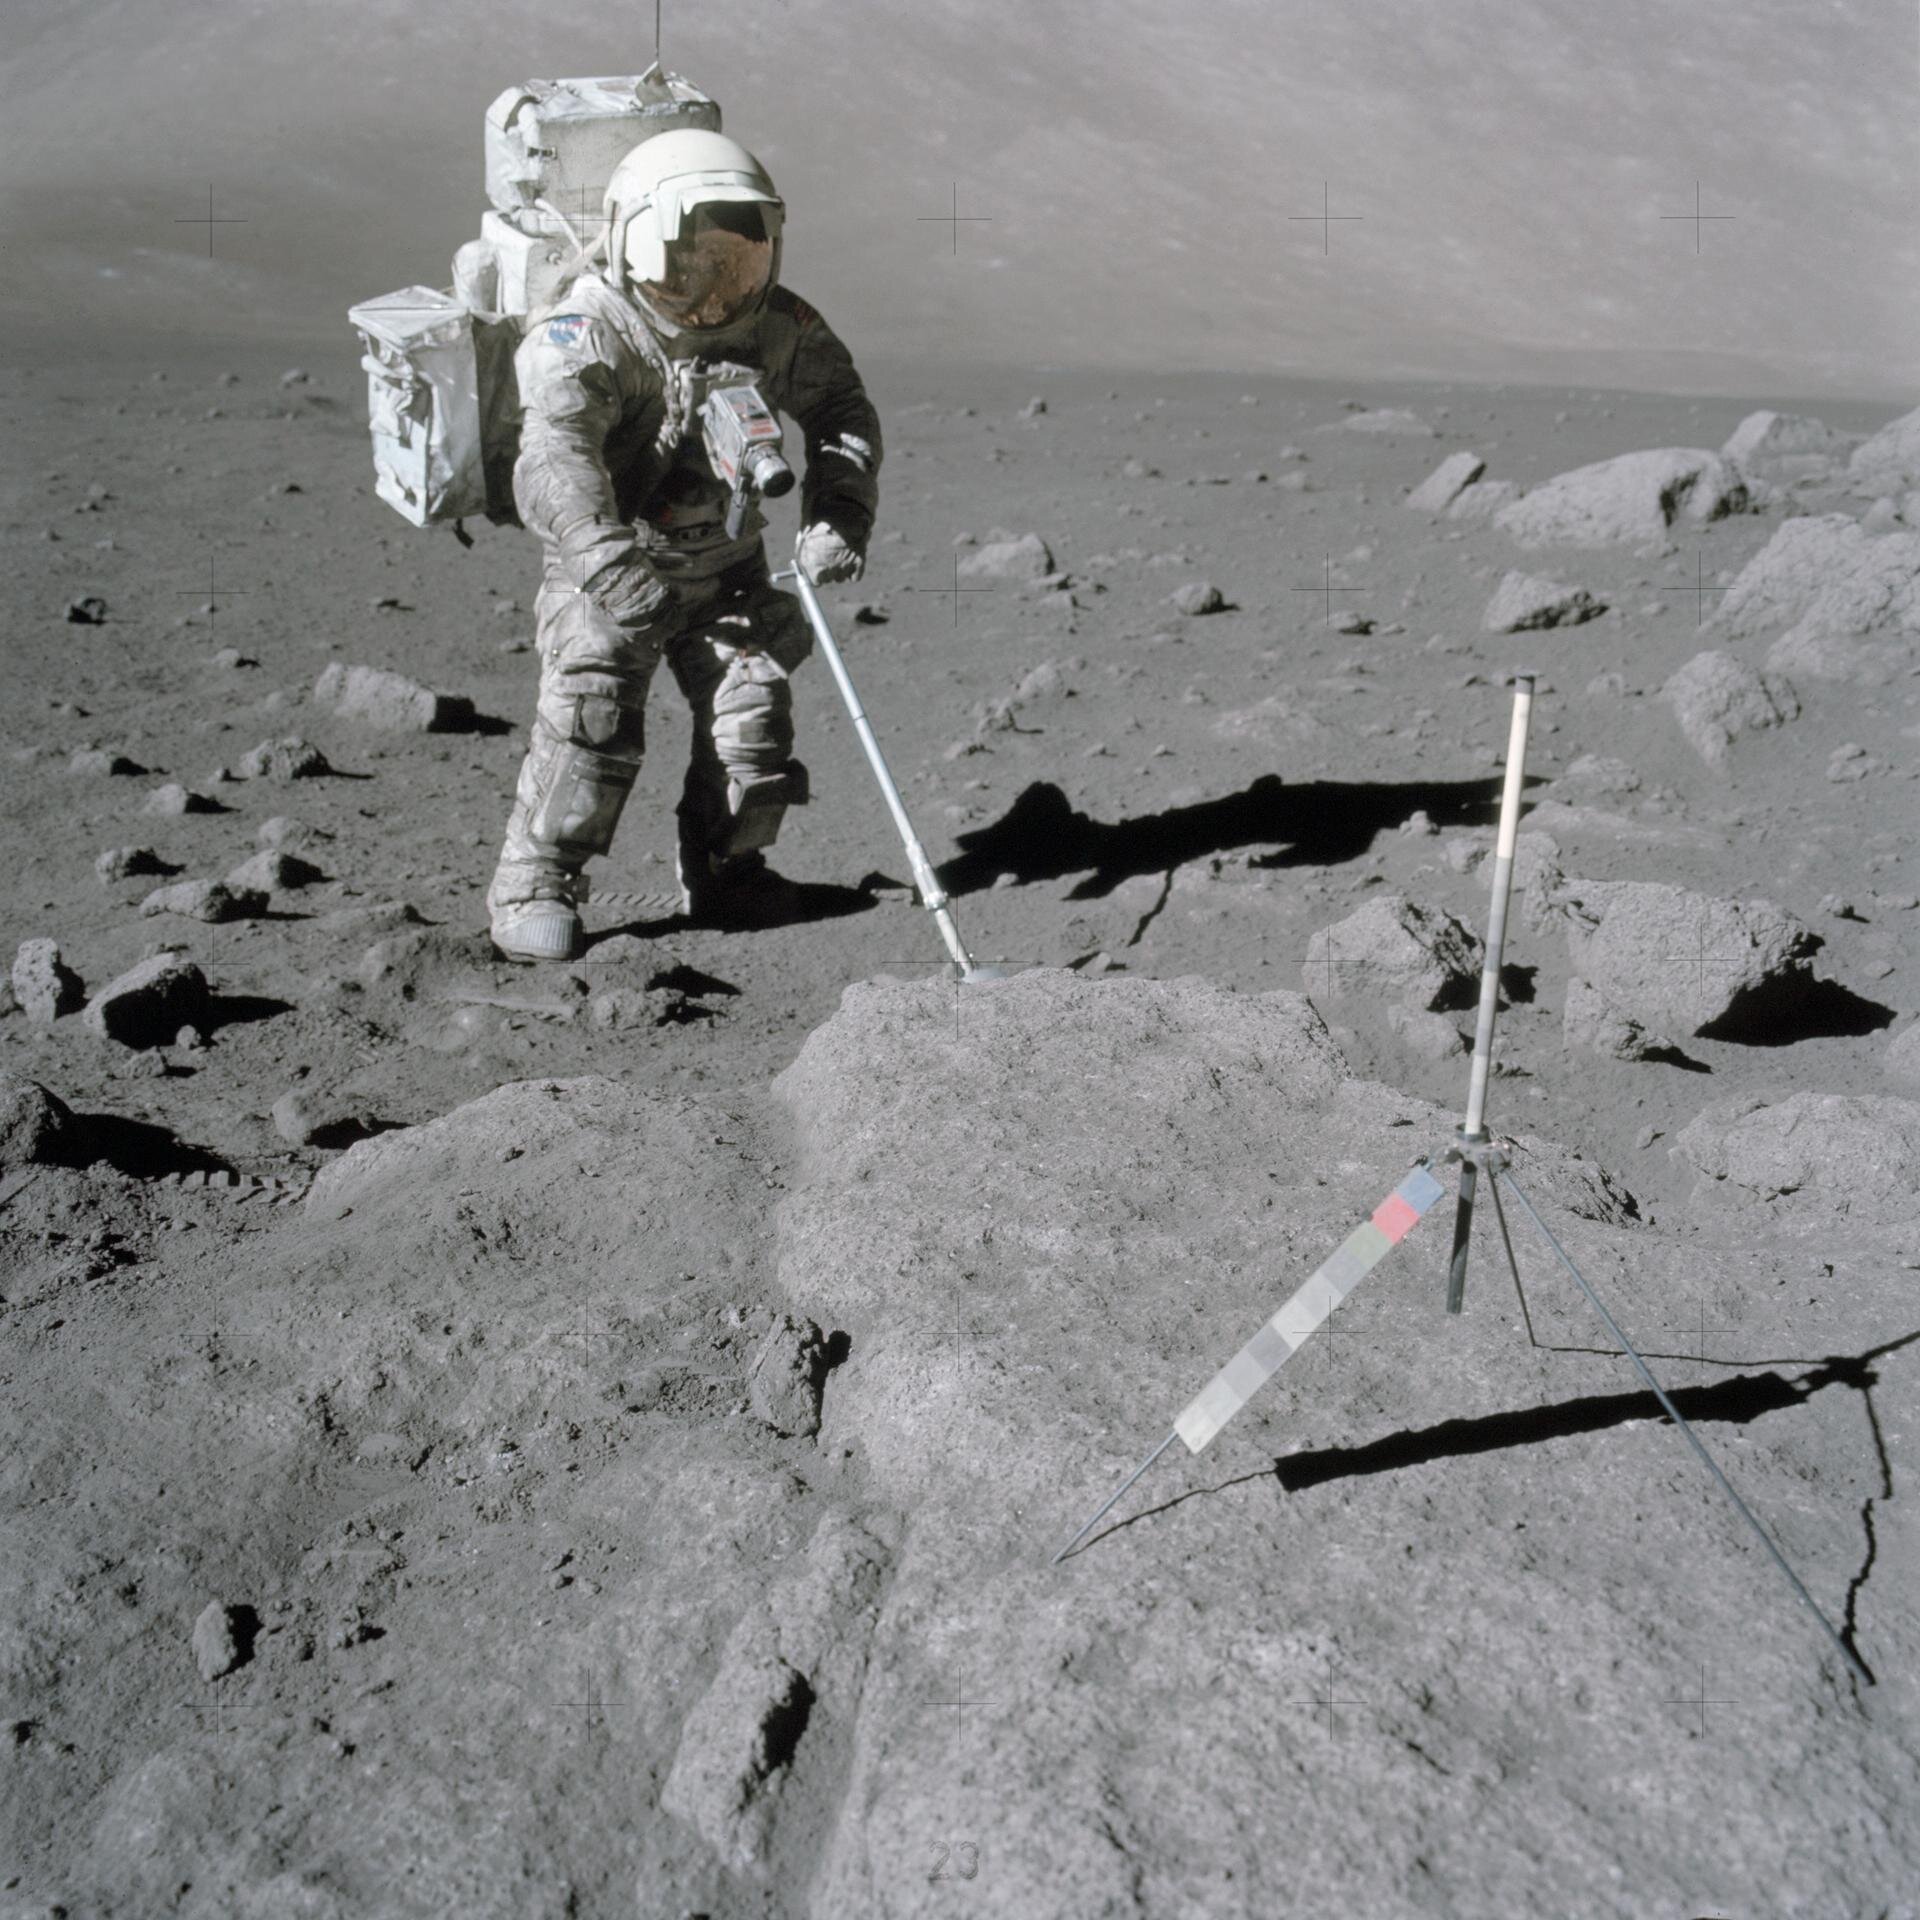 “Lunar dust has some properties that make it particularly unpleasant”